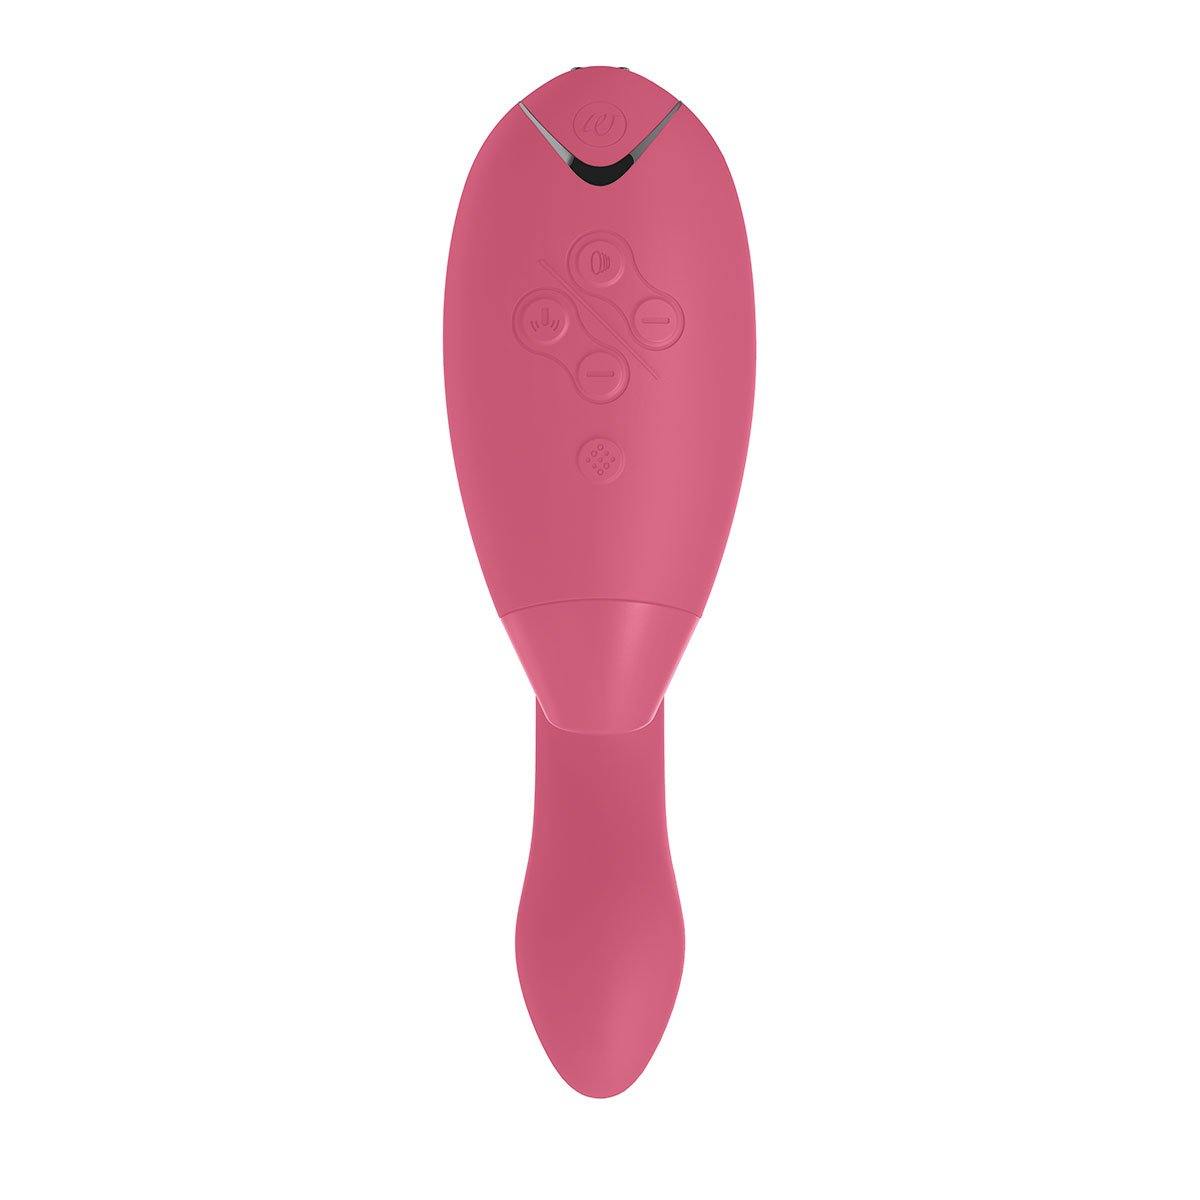 Womanizer Duo Raspberry - Buy At Luxury Toy X - Free 3-Day Shipping